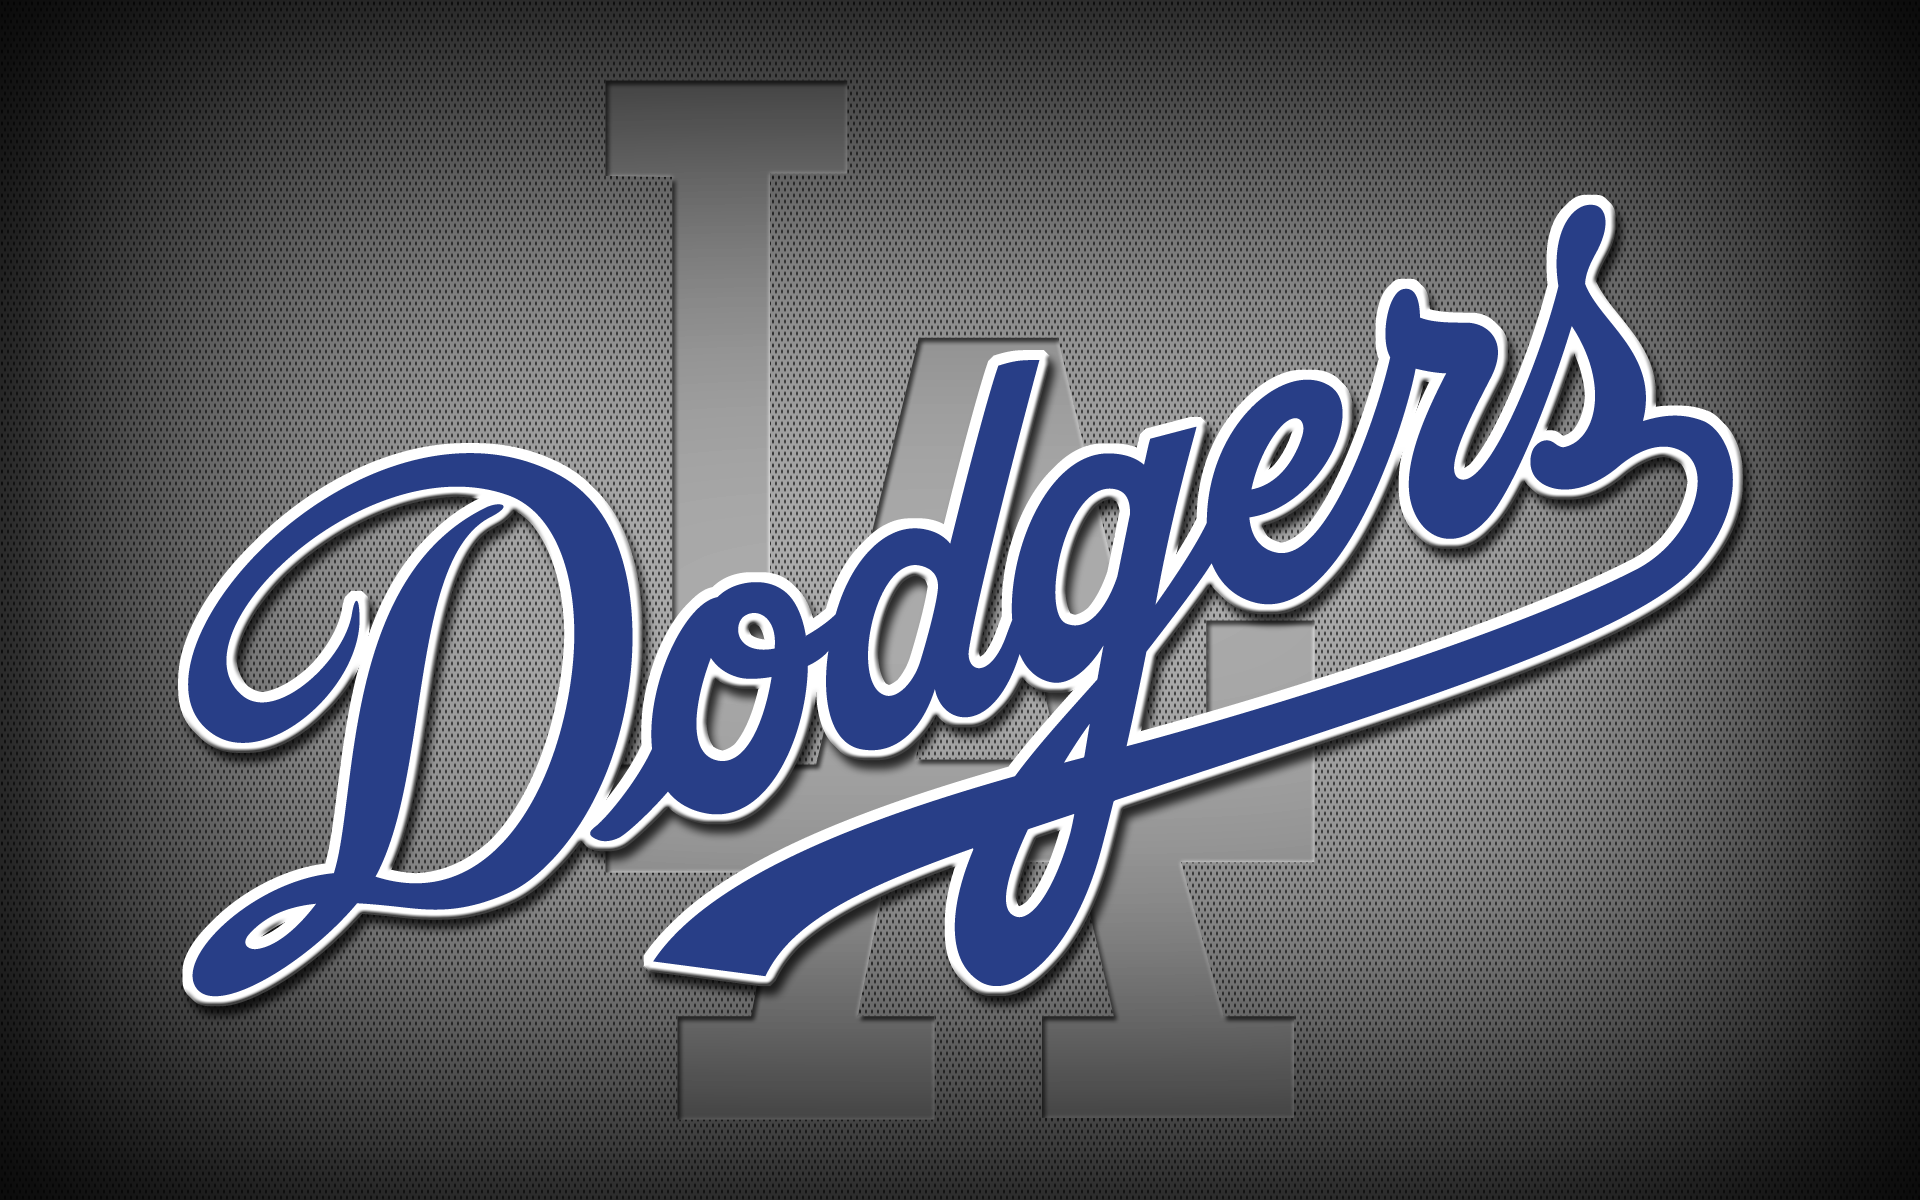 Related to Wallpapers dodgerscom Fan Forum   Los Angeles Dodgers